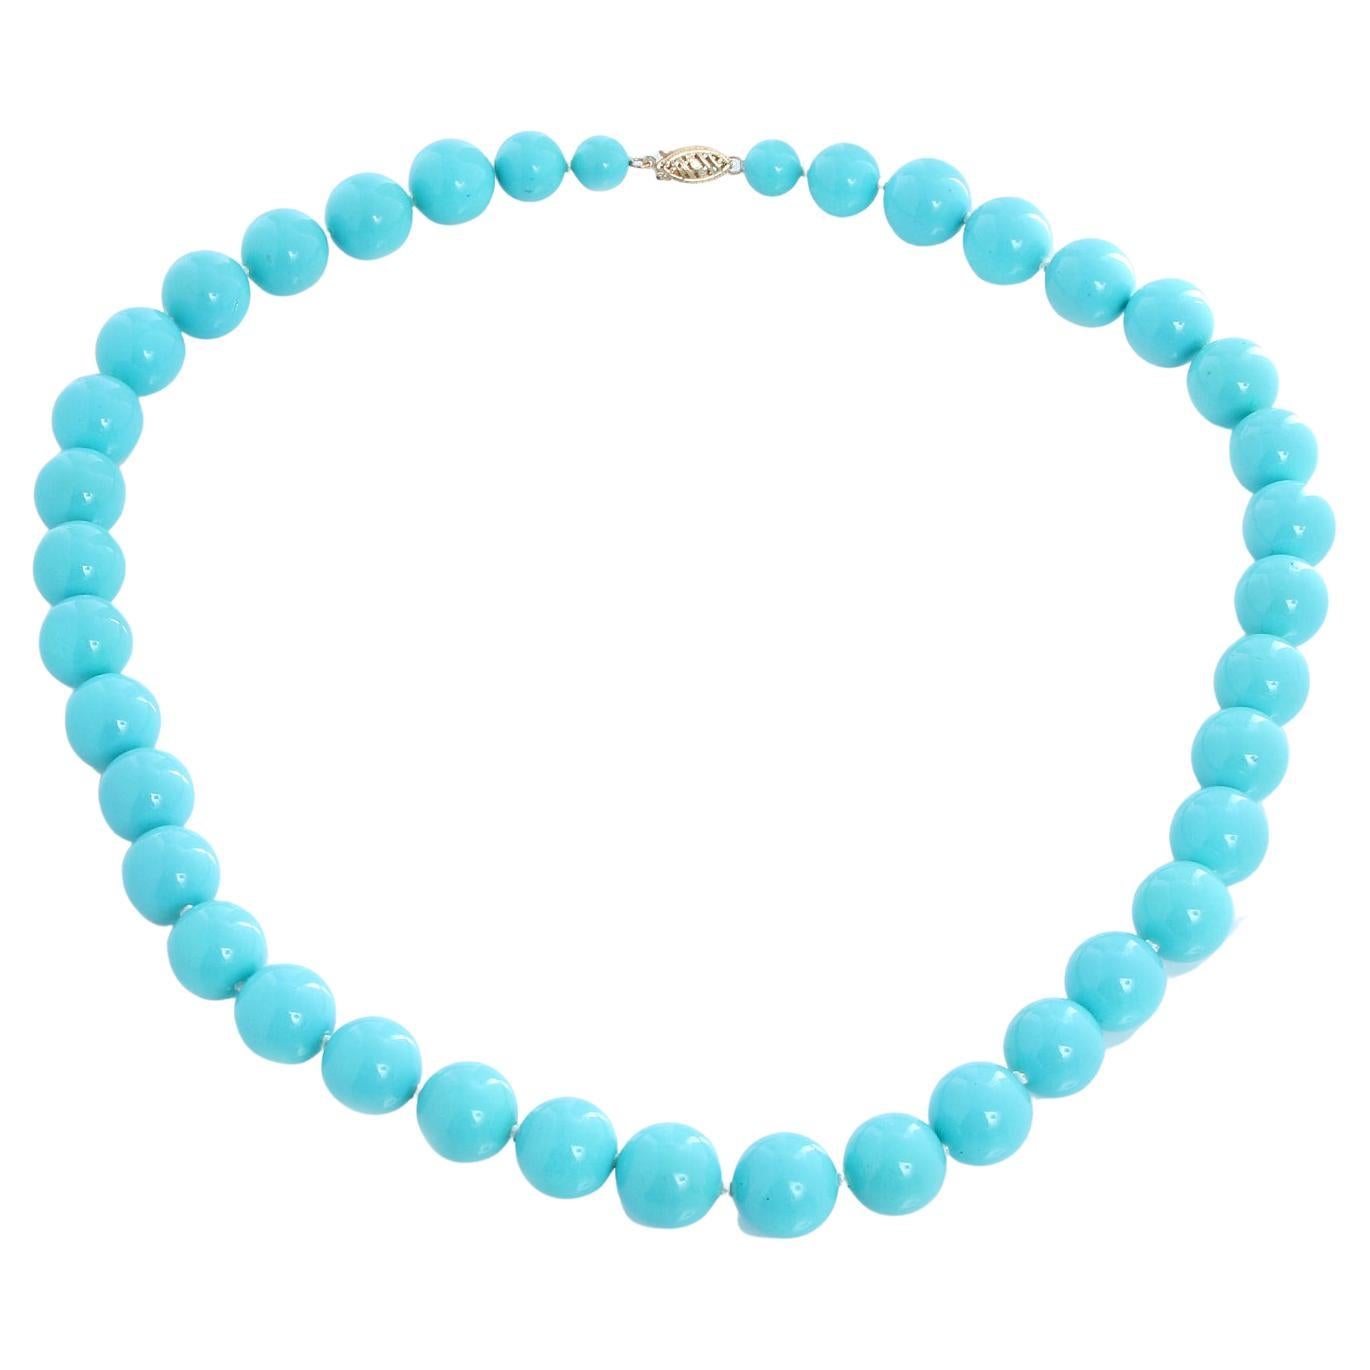 Turquoise Color Bead Necklace